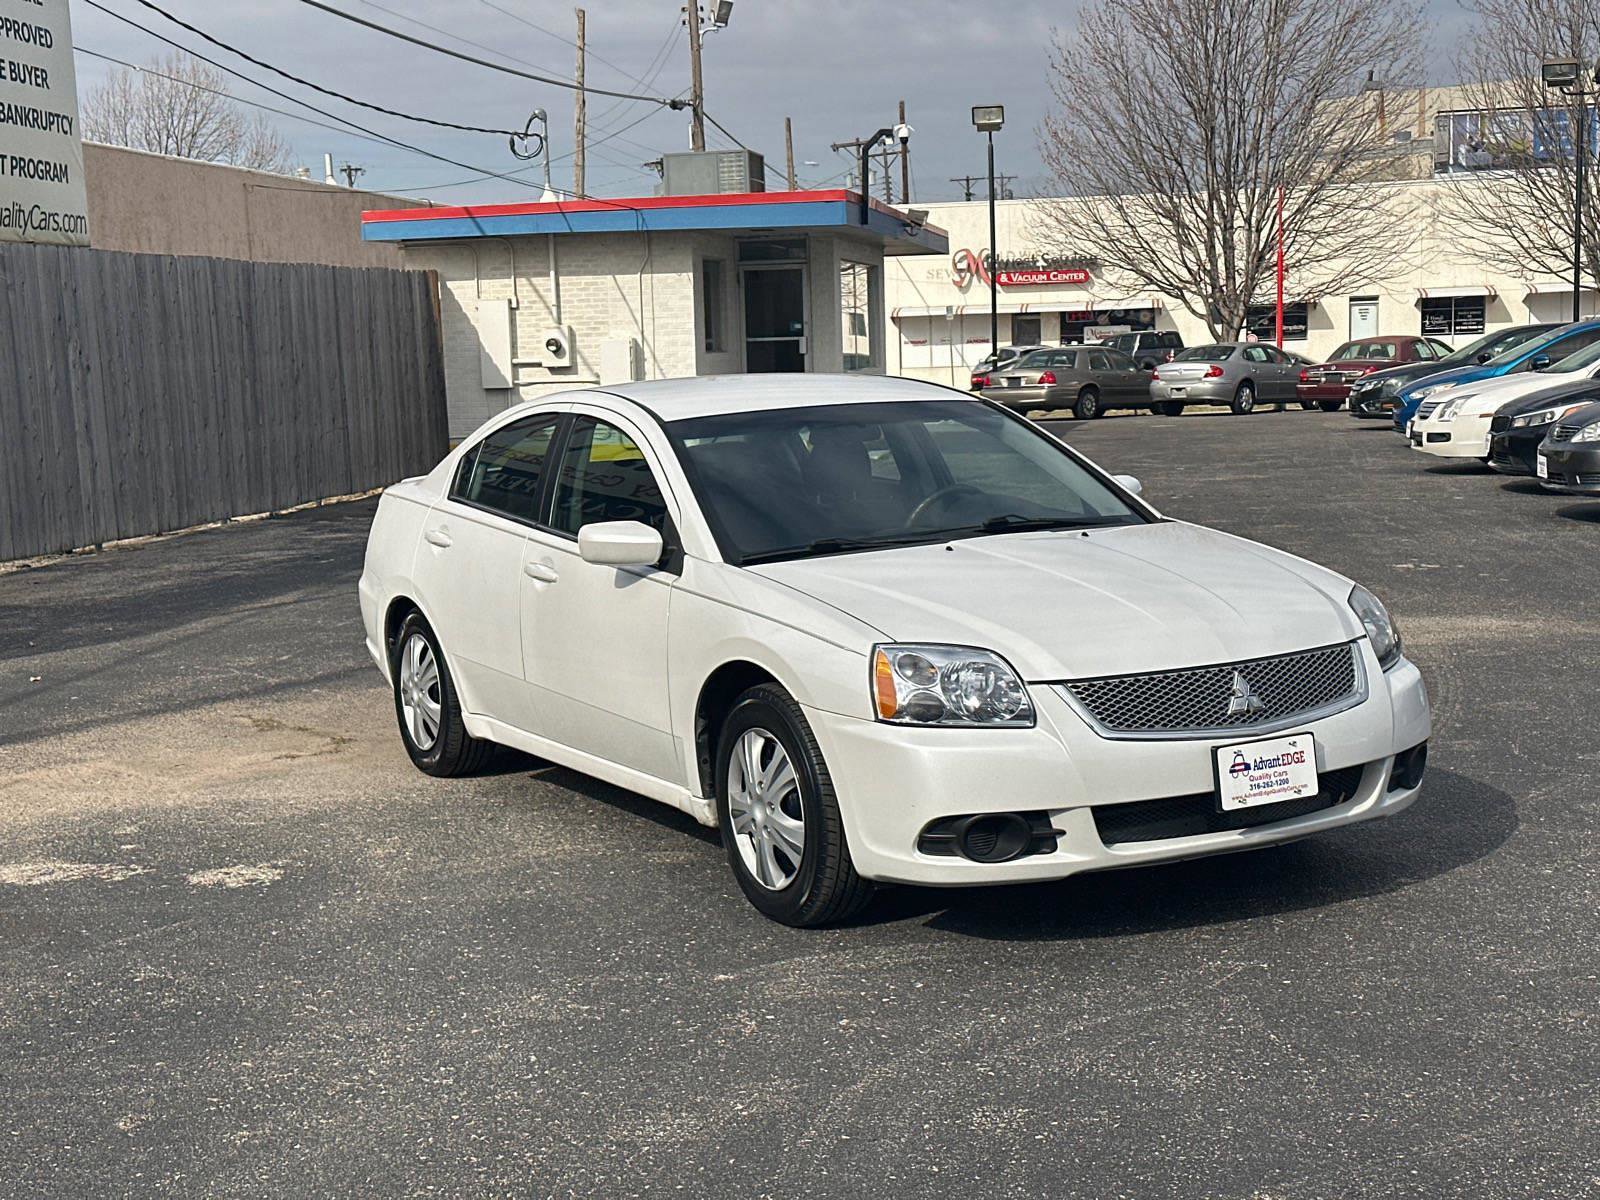 Used 2012 Mitsubishi Galant for Sale Right Now - Autotrader